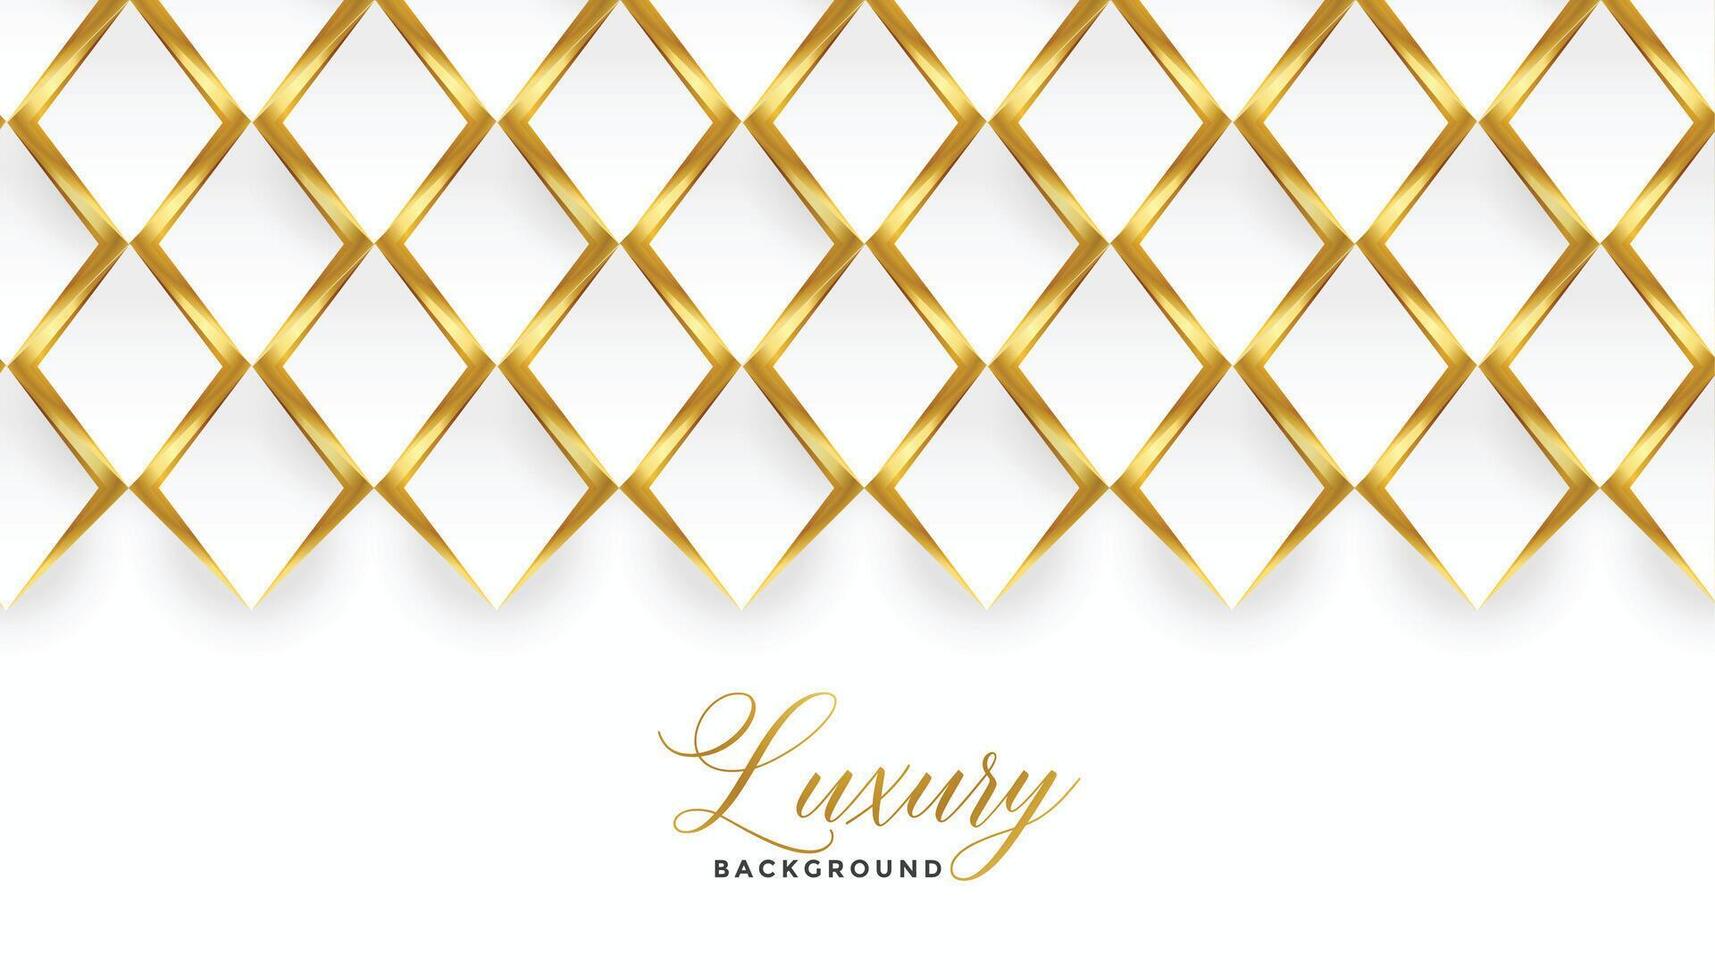 luxury white gold background with diamond shapes vector